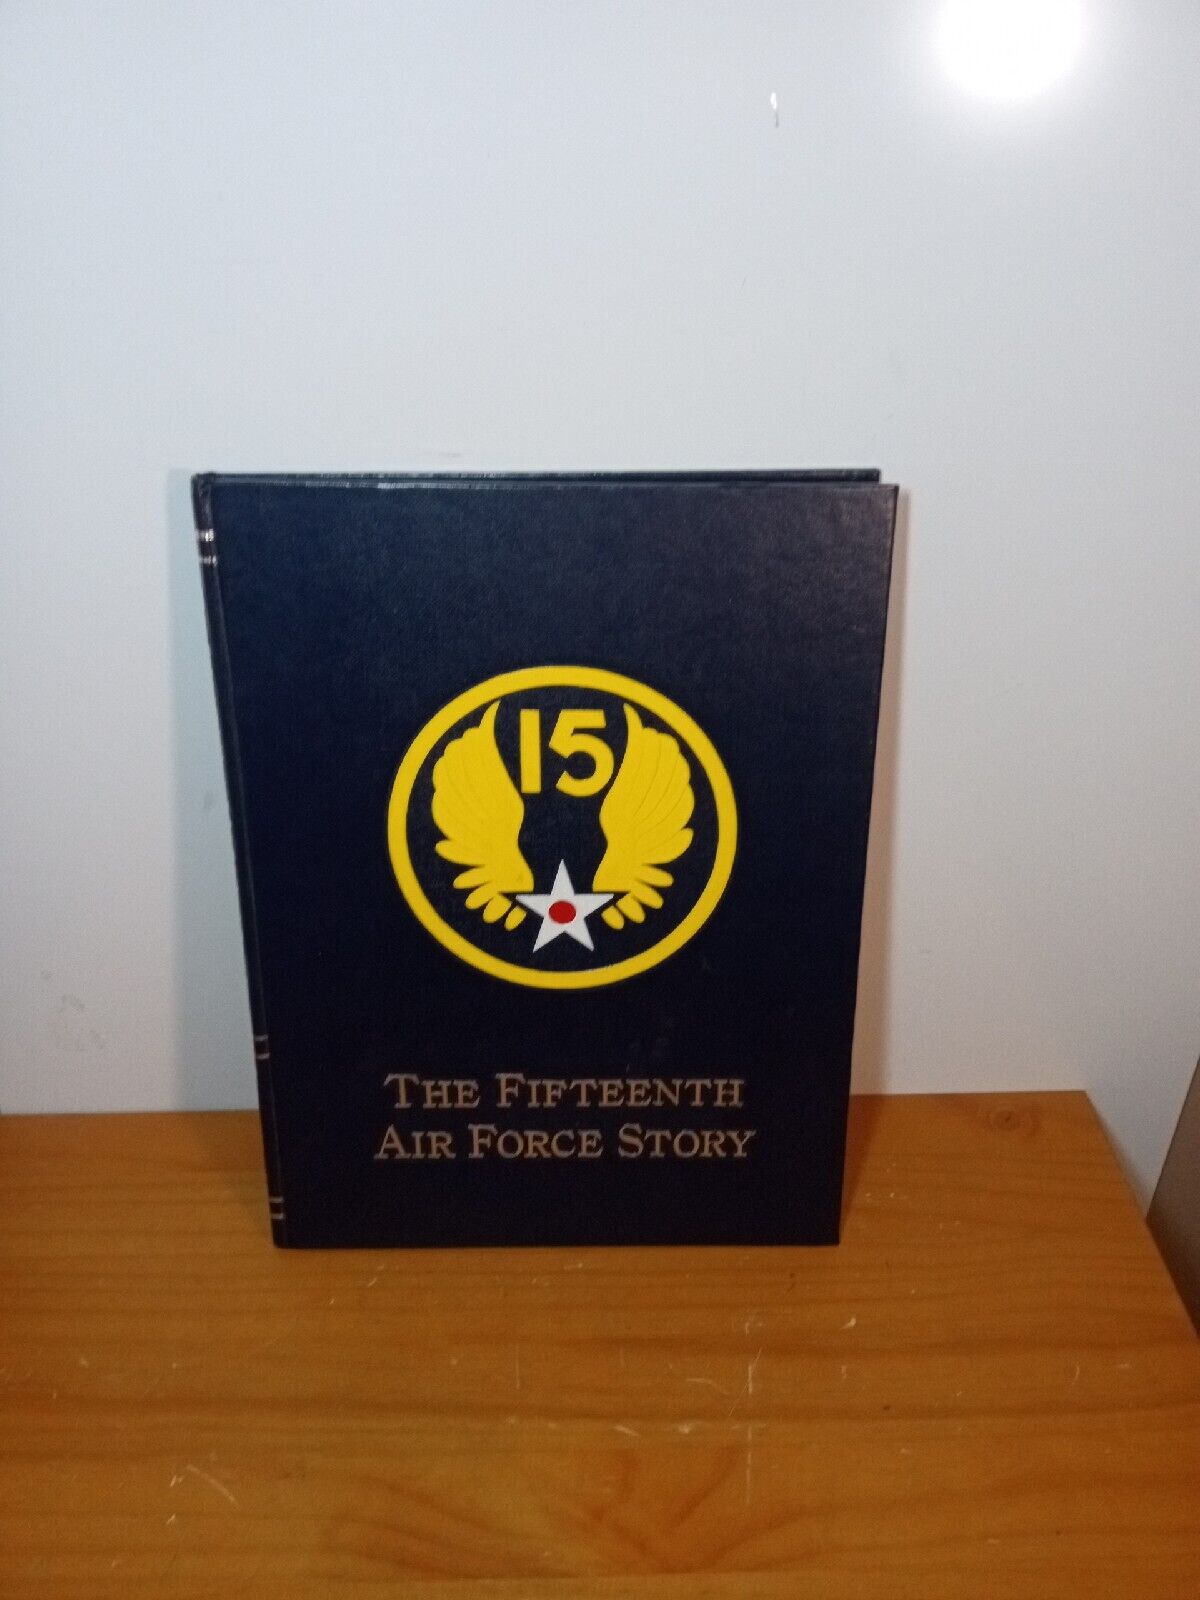 The Fifteenth Air Force Story: A History - 1943-1985 Hardcover AF Association 